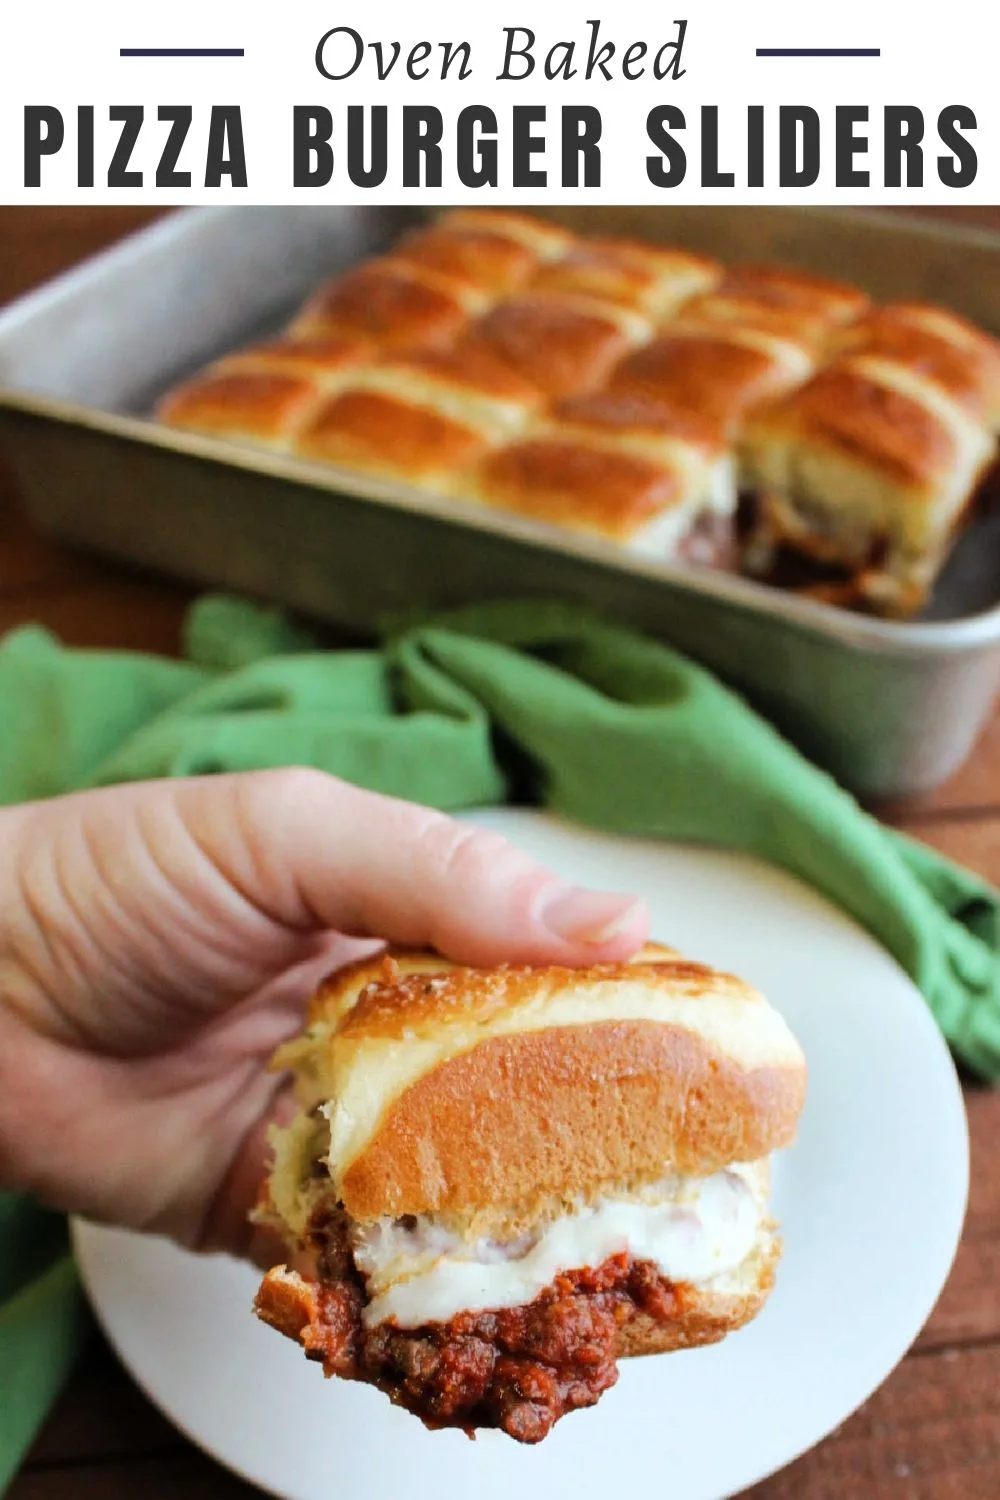 Pizza burger sliders have big pizza flavor, gooey cheese and a slightly crisp garlic bread style exterior. They are a fun dinner or game day appetizer.